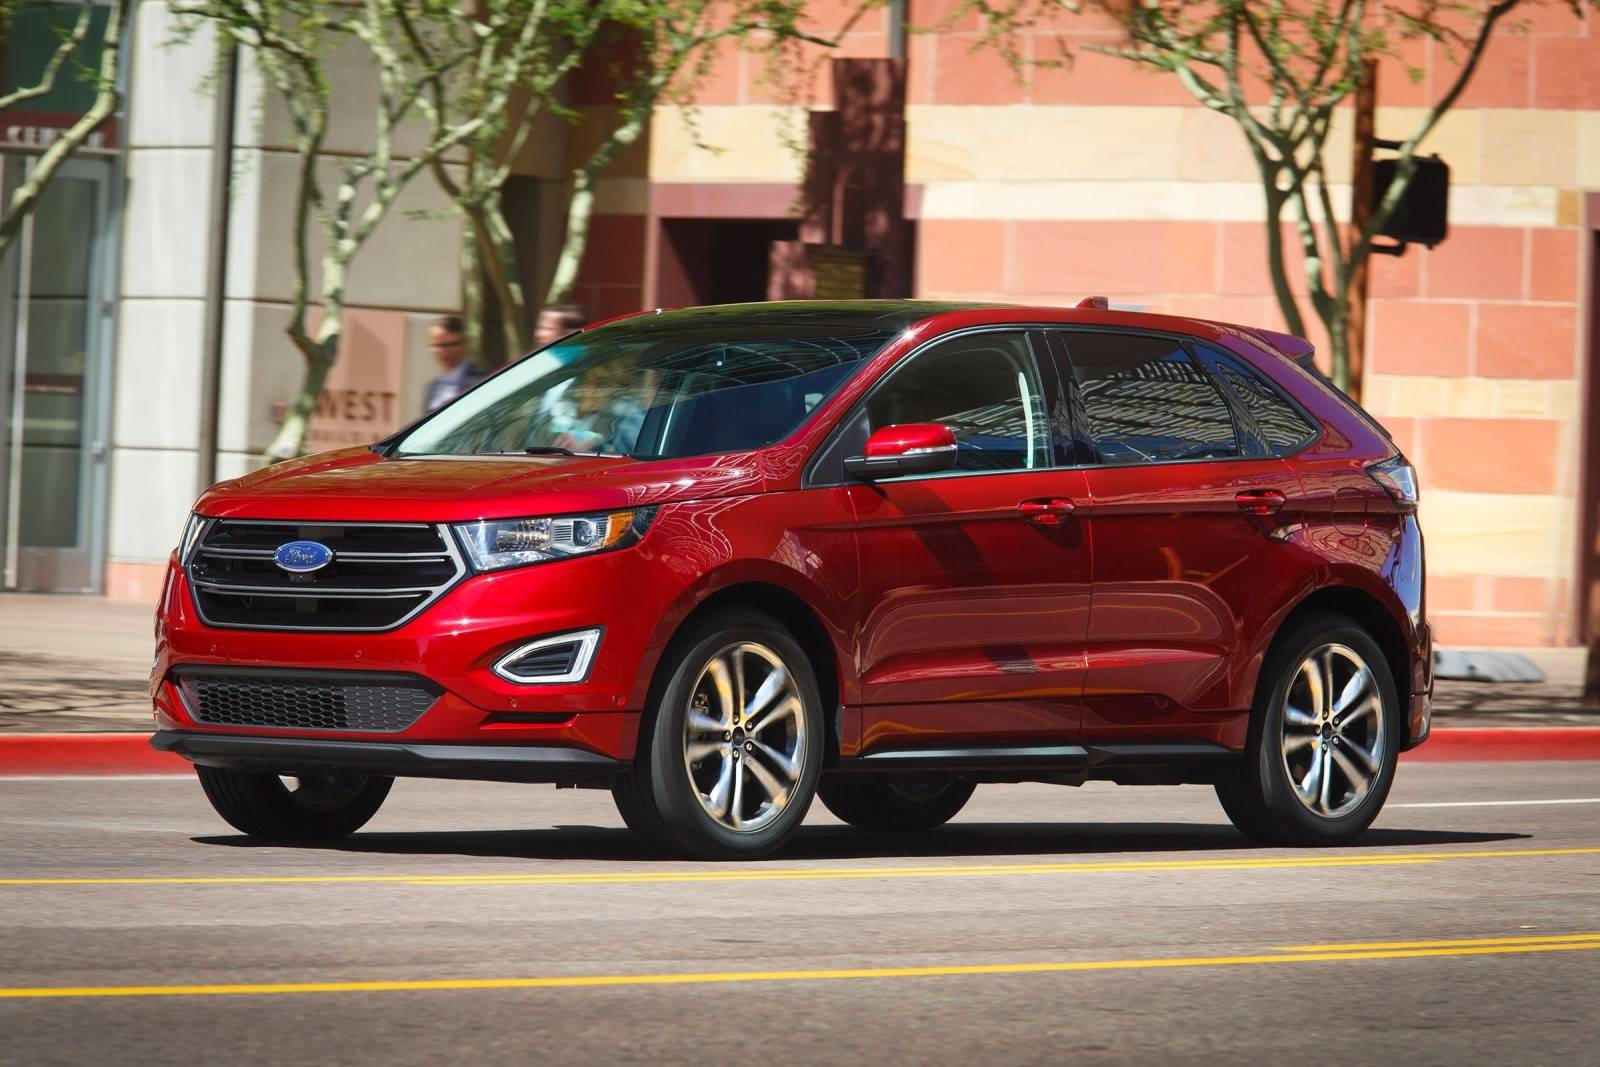 2018 Ford Edge Review, Pricing | Edge SUV Models | CarBuzz